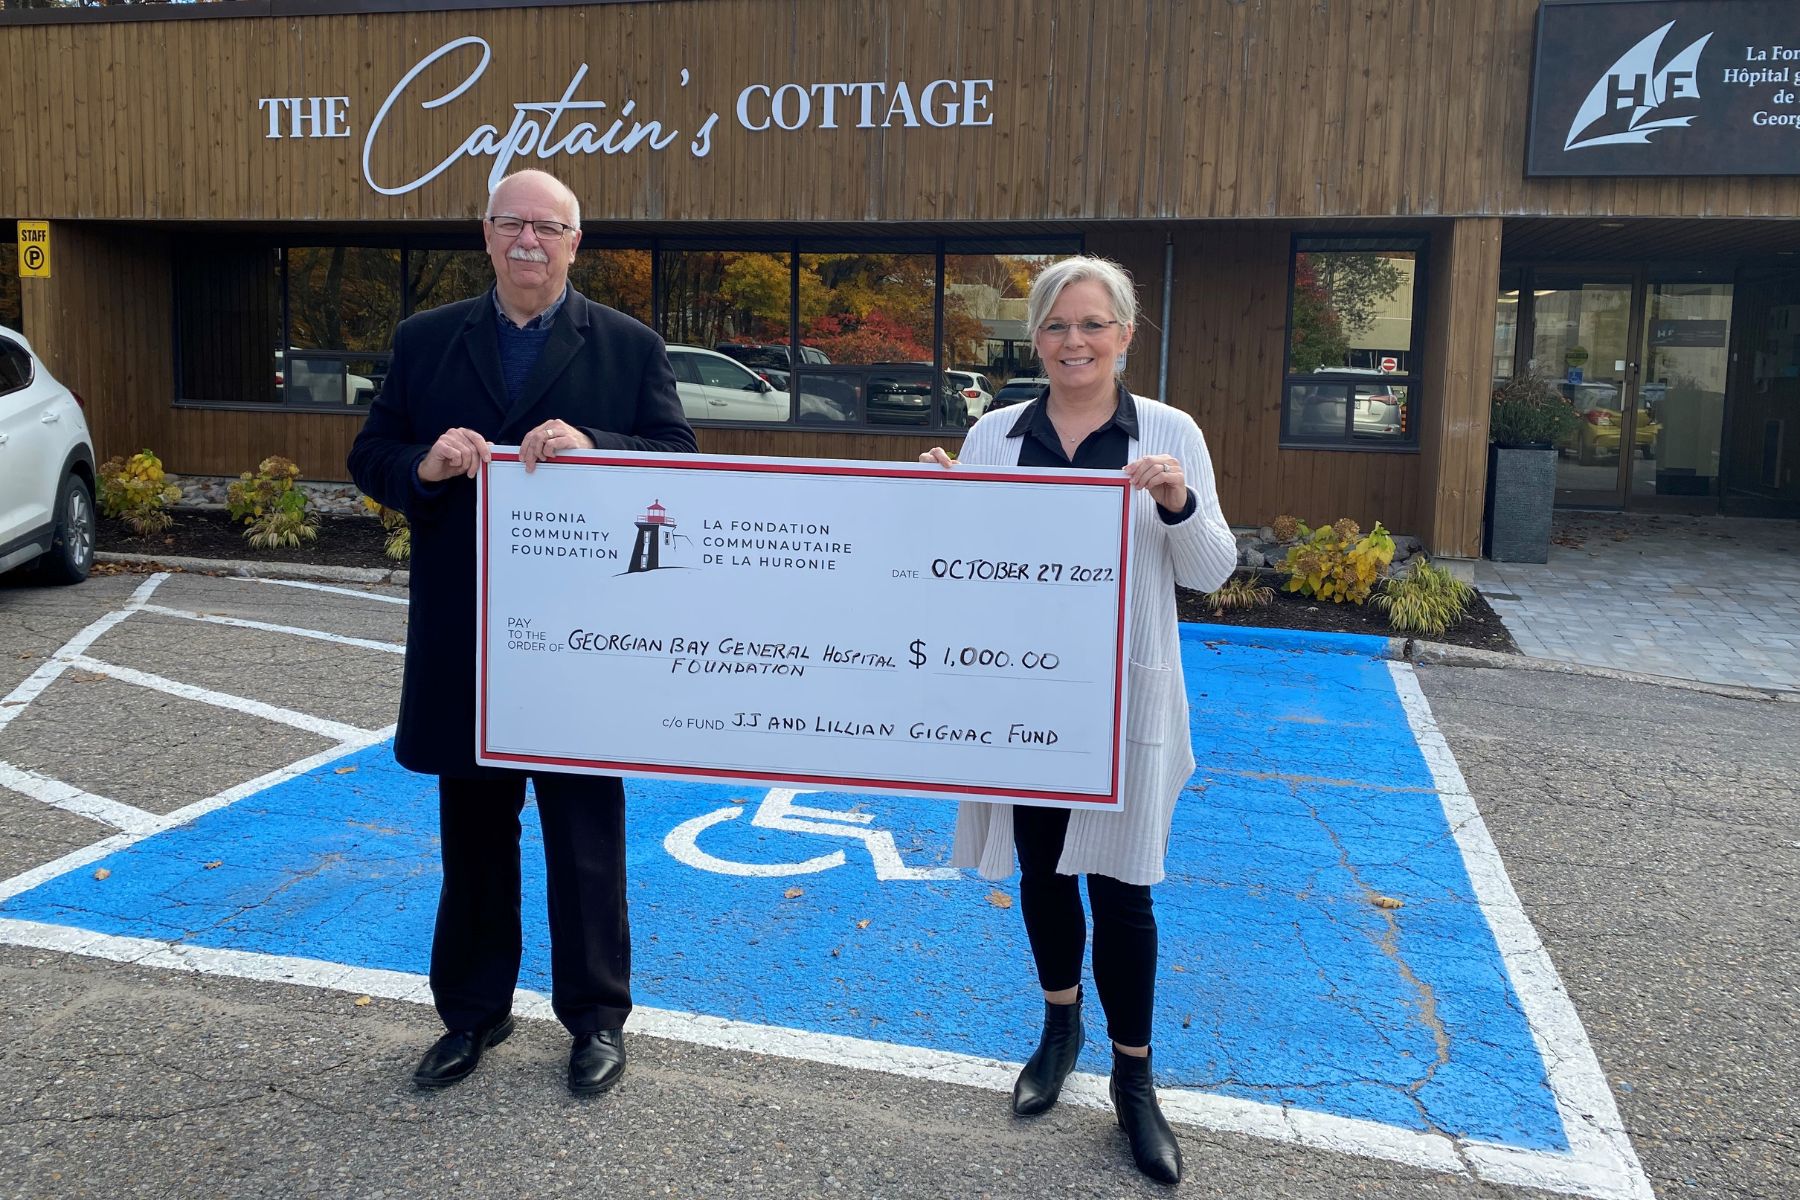 A man and woman holding a giant cheque for $1,000 made out to GBGH Foundation from Jj ans Lillian Gignac fund